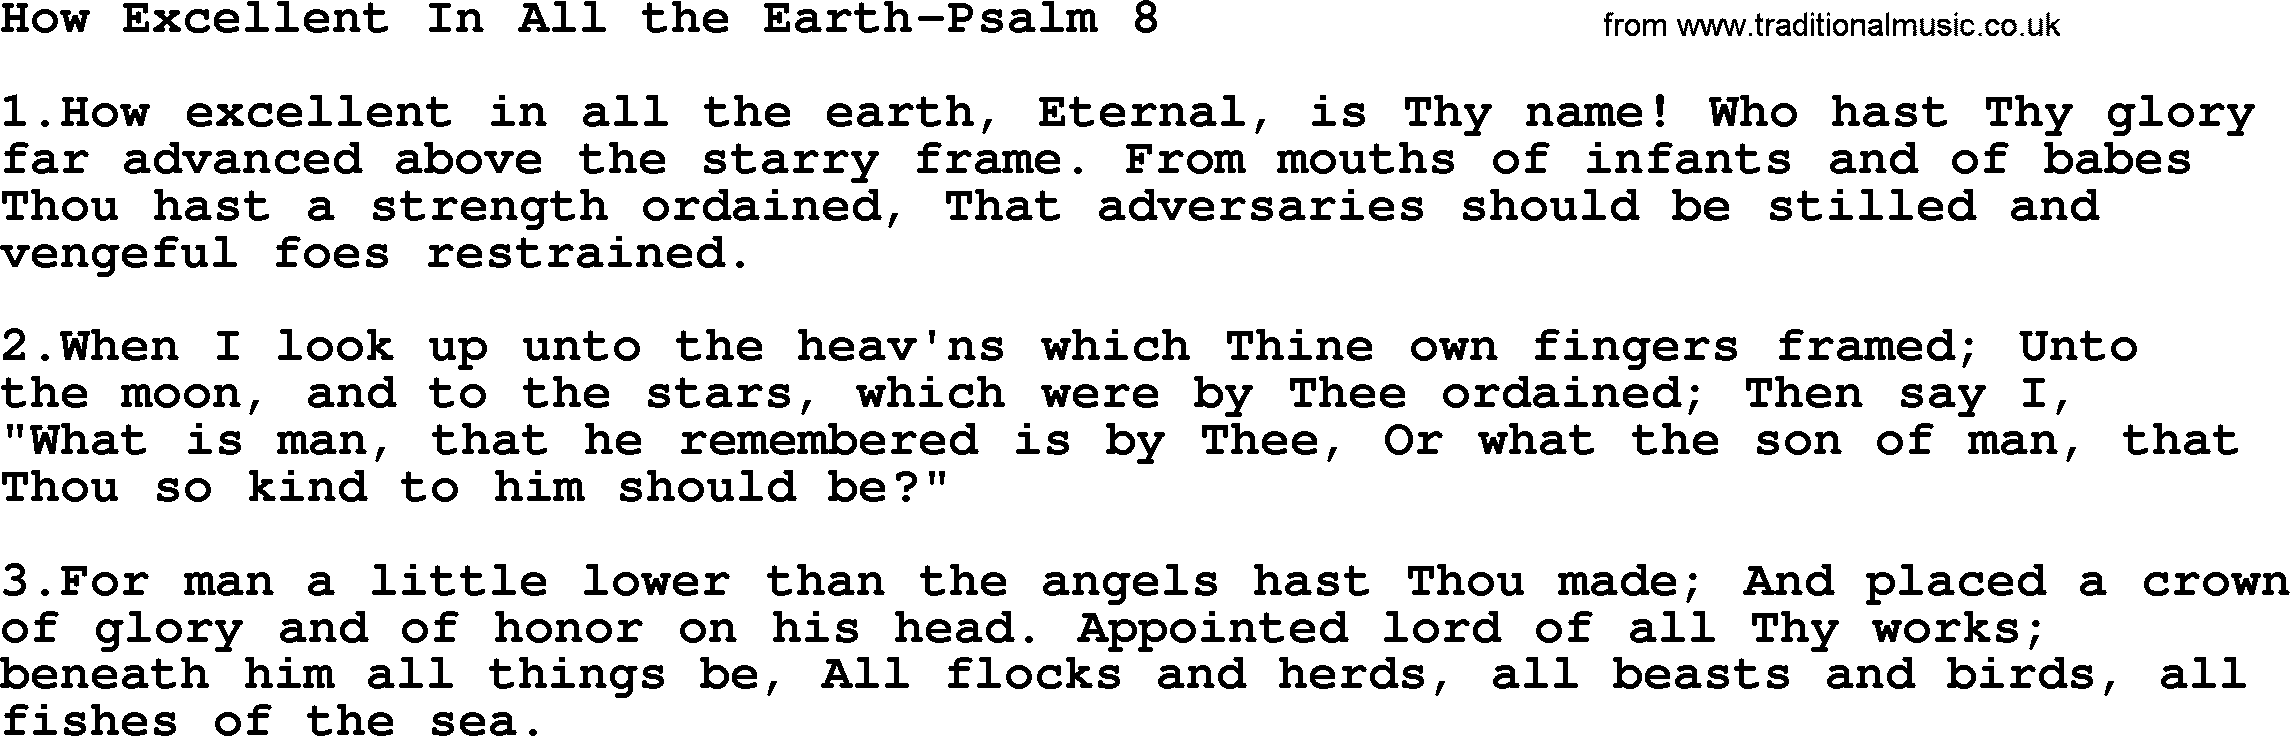 Hymns from the Psalms, Hymn: How Excellent In All The Earth-Psalm 8, lyrics with PDF